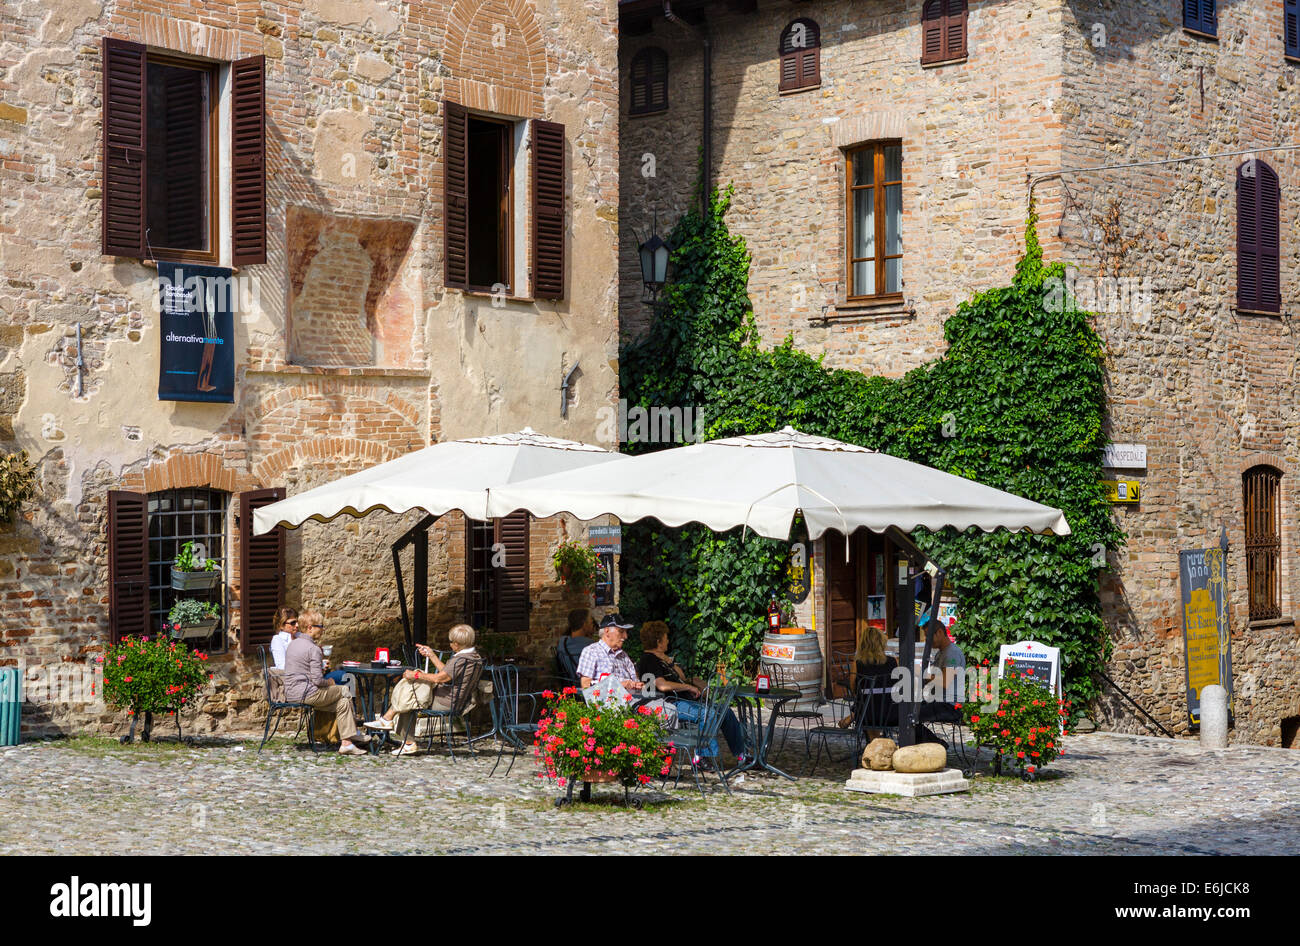 Cafe in Piazza Matteotti, the main square, of the medieval old town of Castell'Arquato, Piacenza, Emilia Romagna, Italy Stock Photo